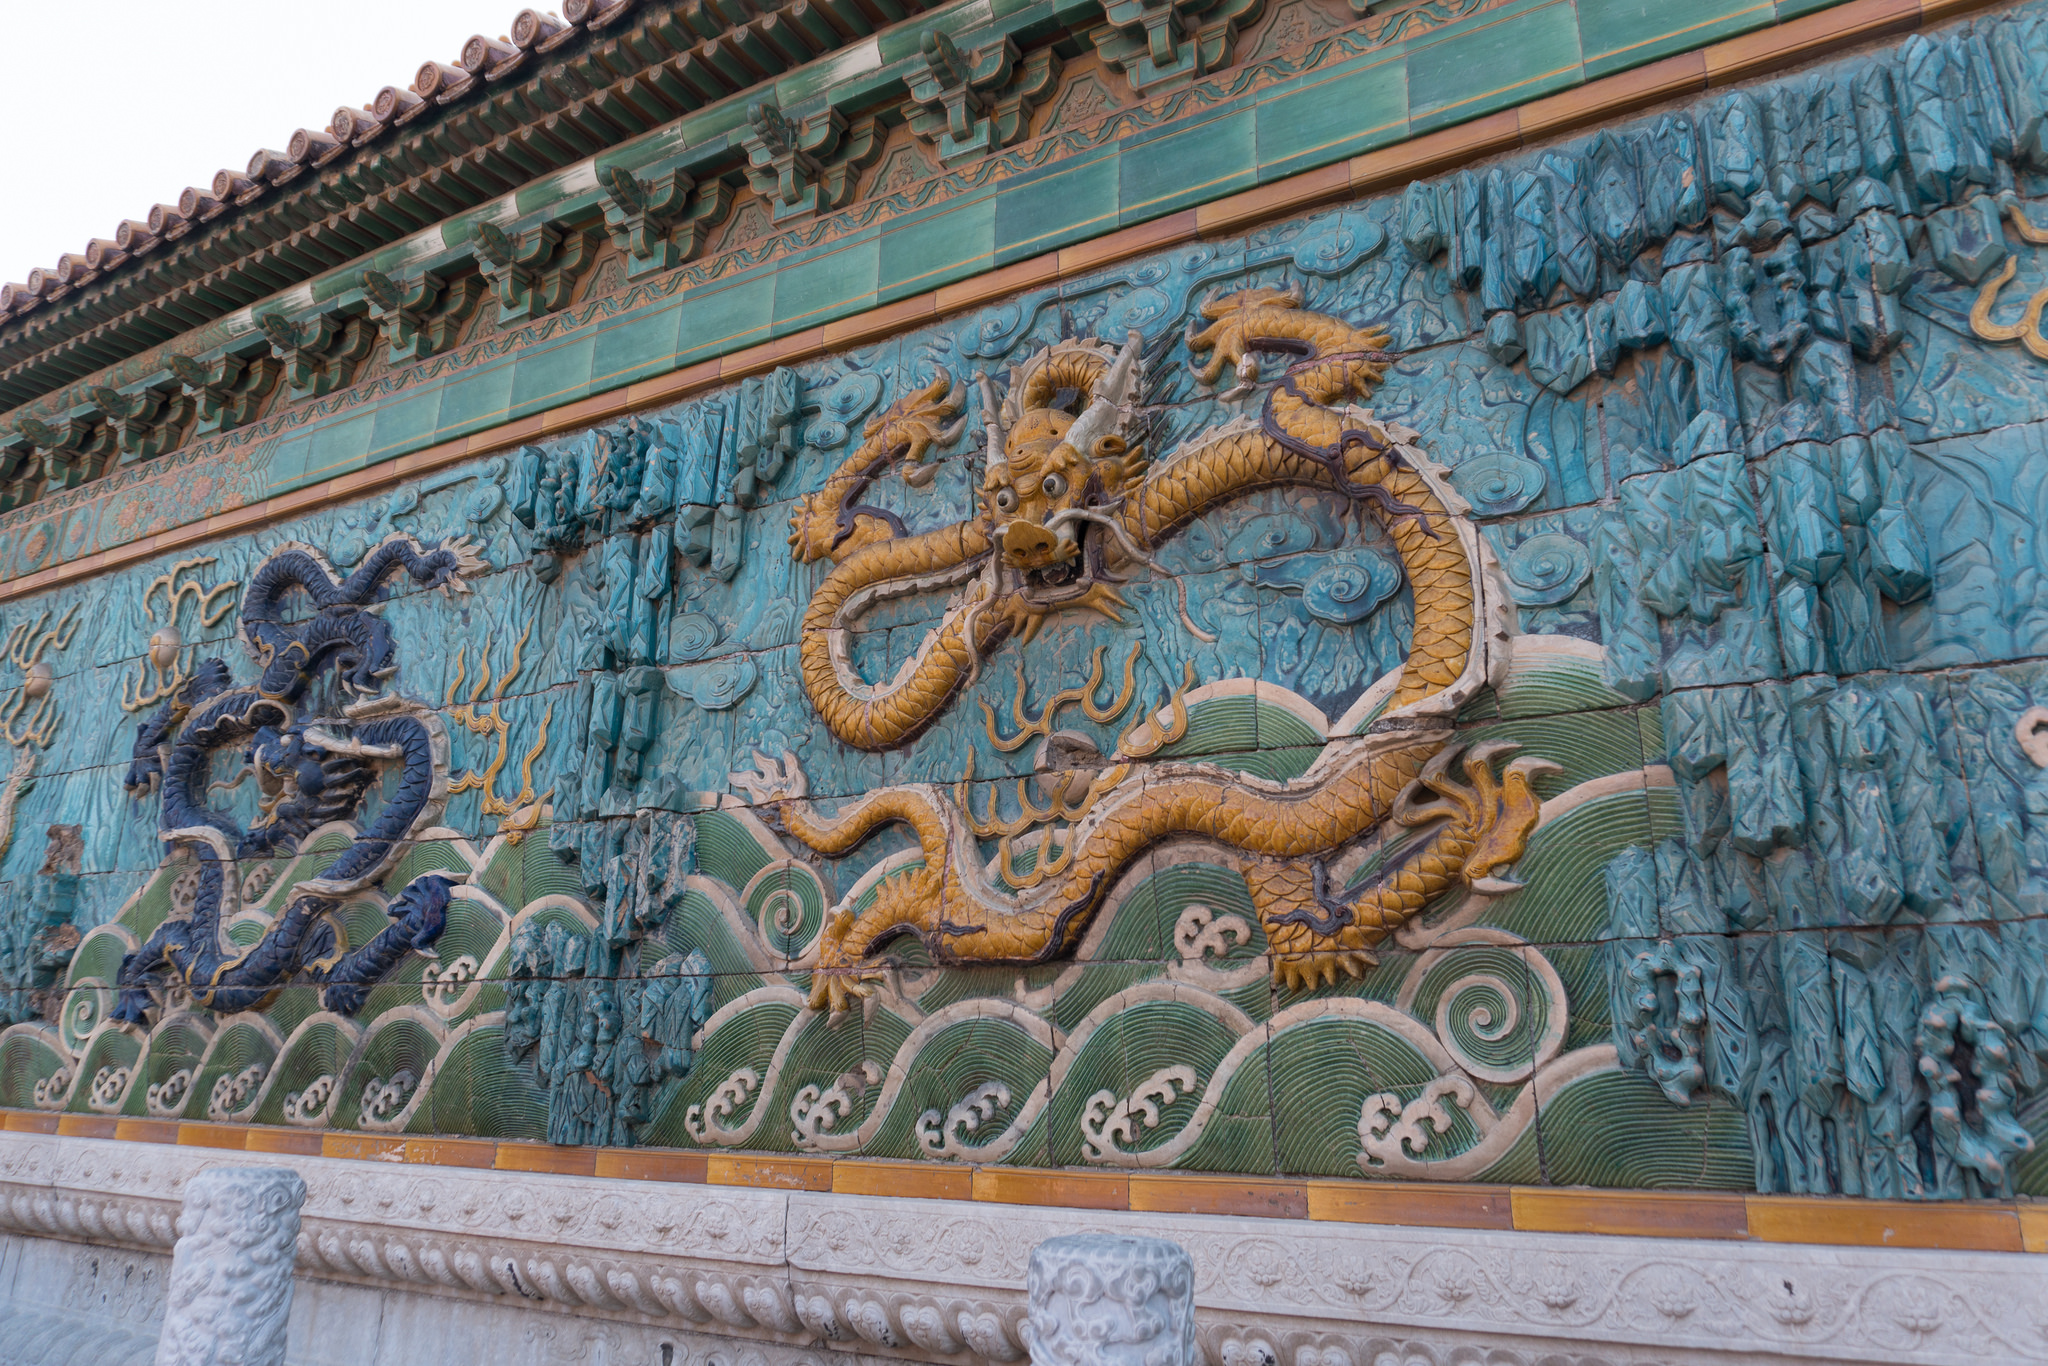 dragons in the Forbidden City